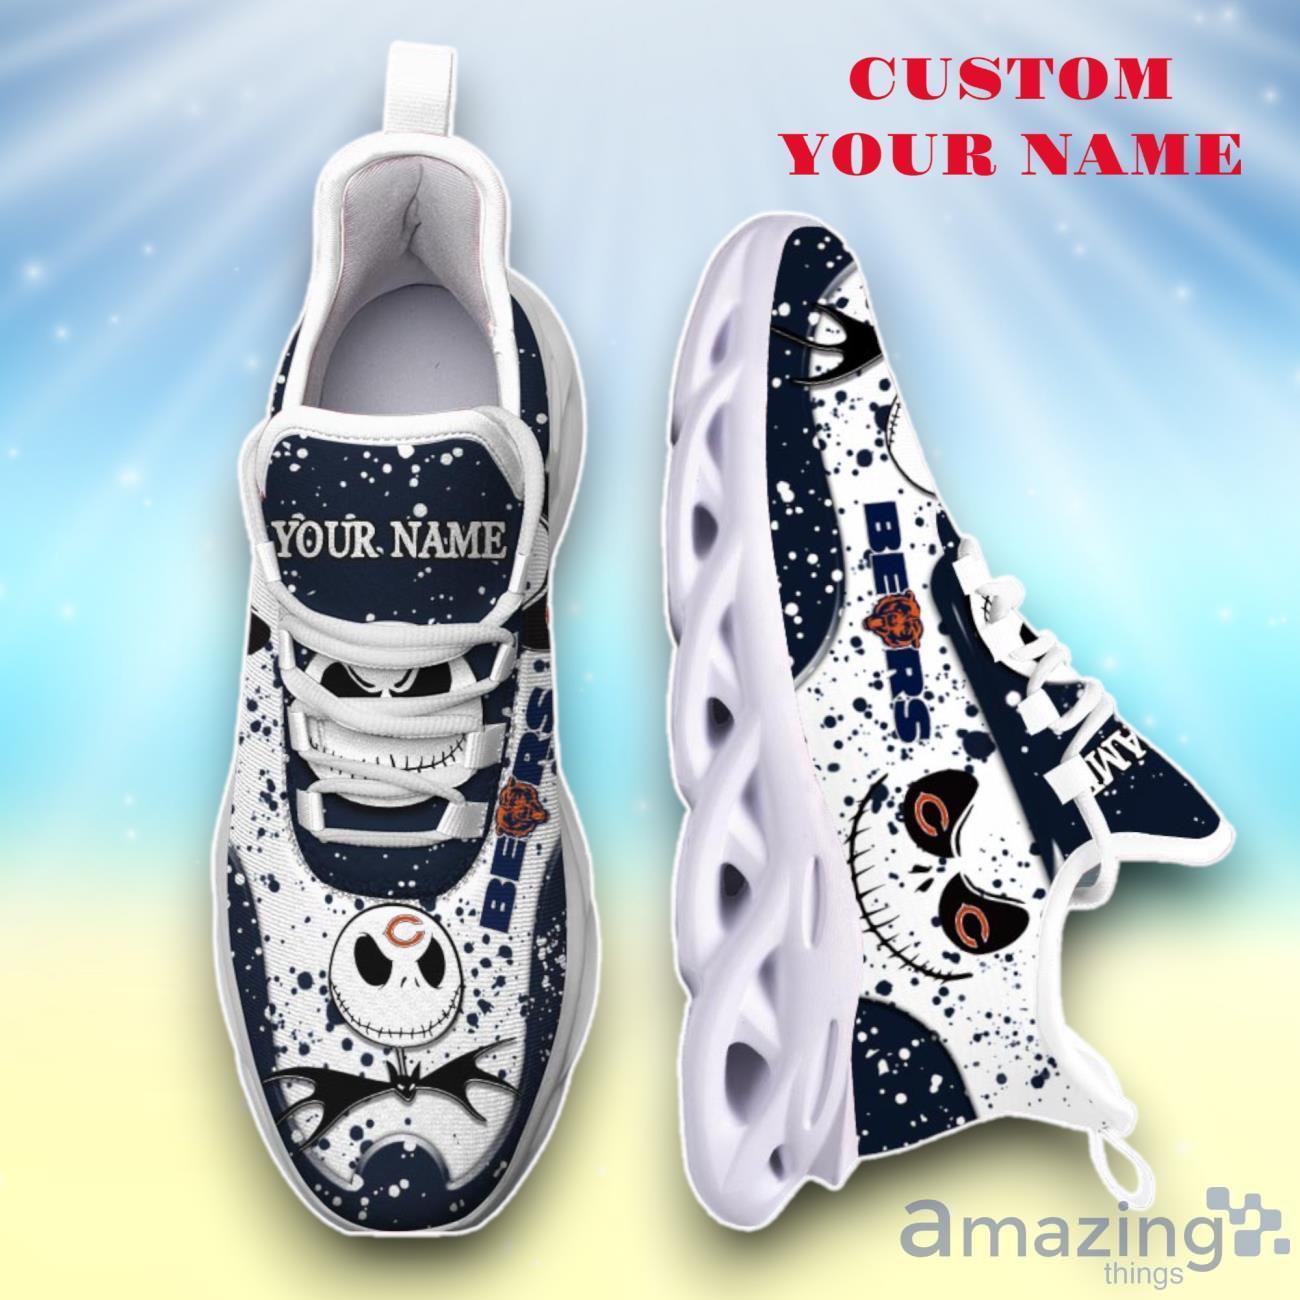 Chicago Bears White C Max Soul Shoes Custom Name Exclusive Sneakers For Fans Product Photo 1